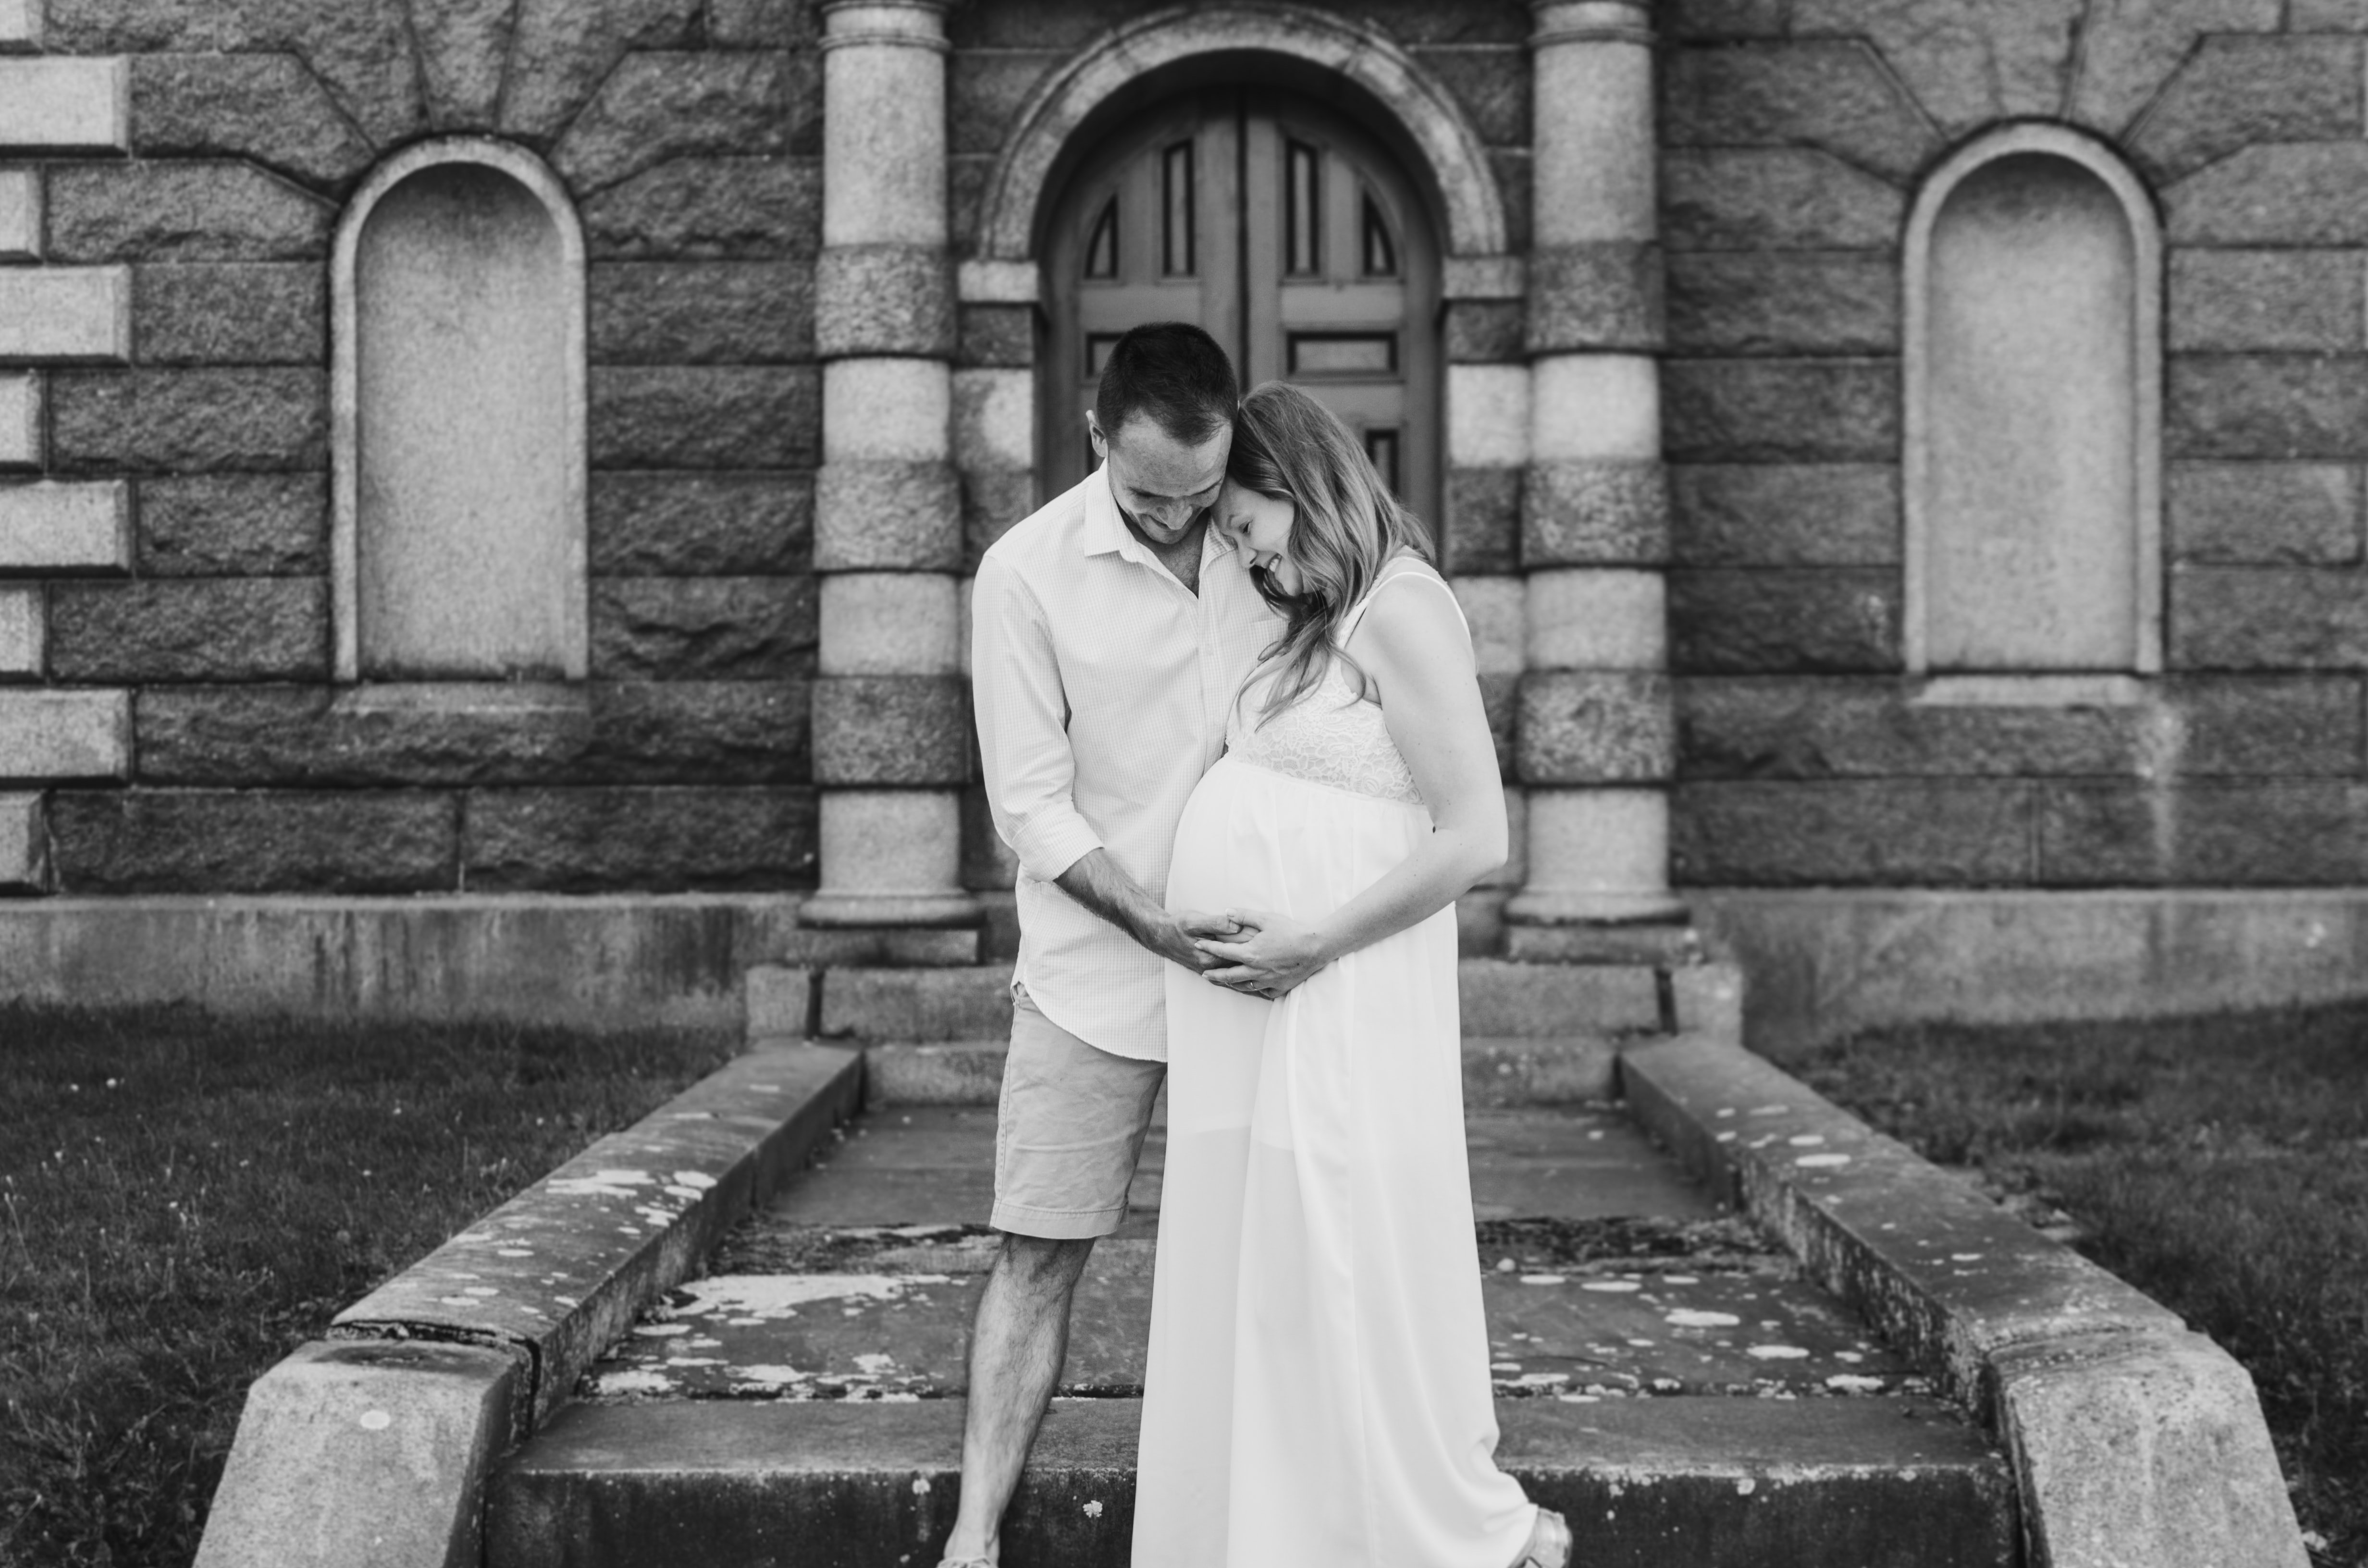 OP was a happy man who was soon swept away by doubts about his pregnant wife |  Photo: Unsplash